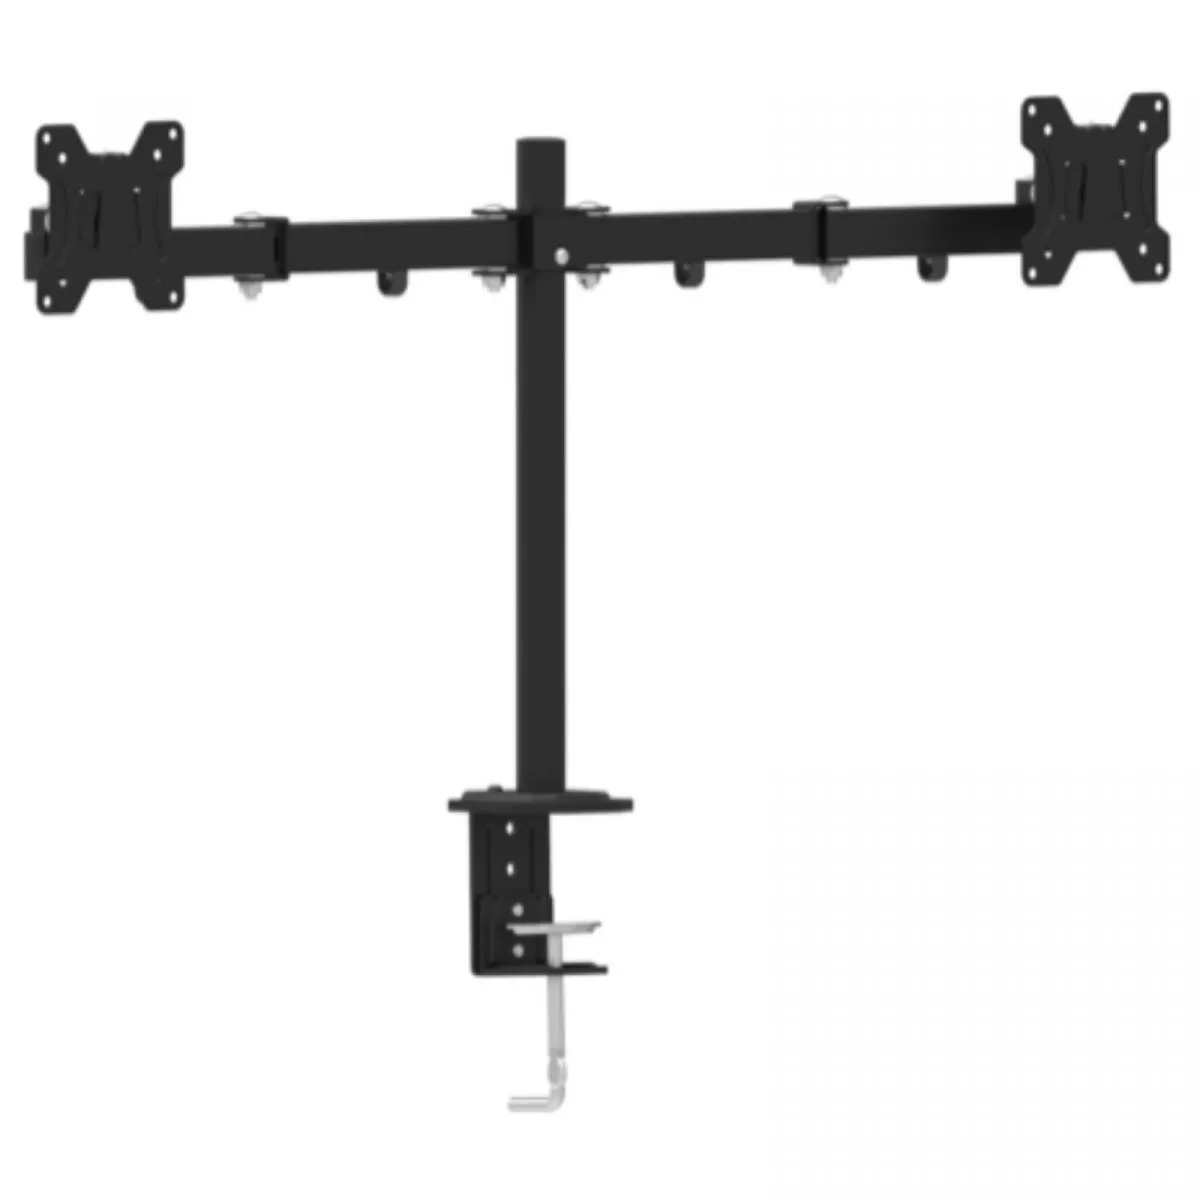 Arm for 2 monitors 13"-27" - Gembird MA-DF2-01, Steel, VESA 75/100, arm allows to swivel, extend, re